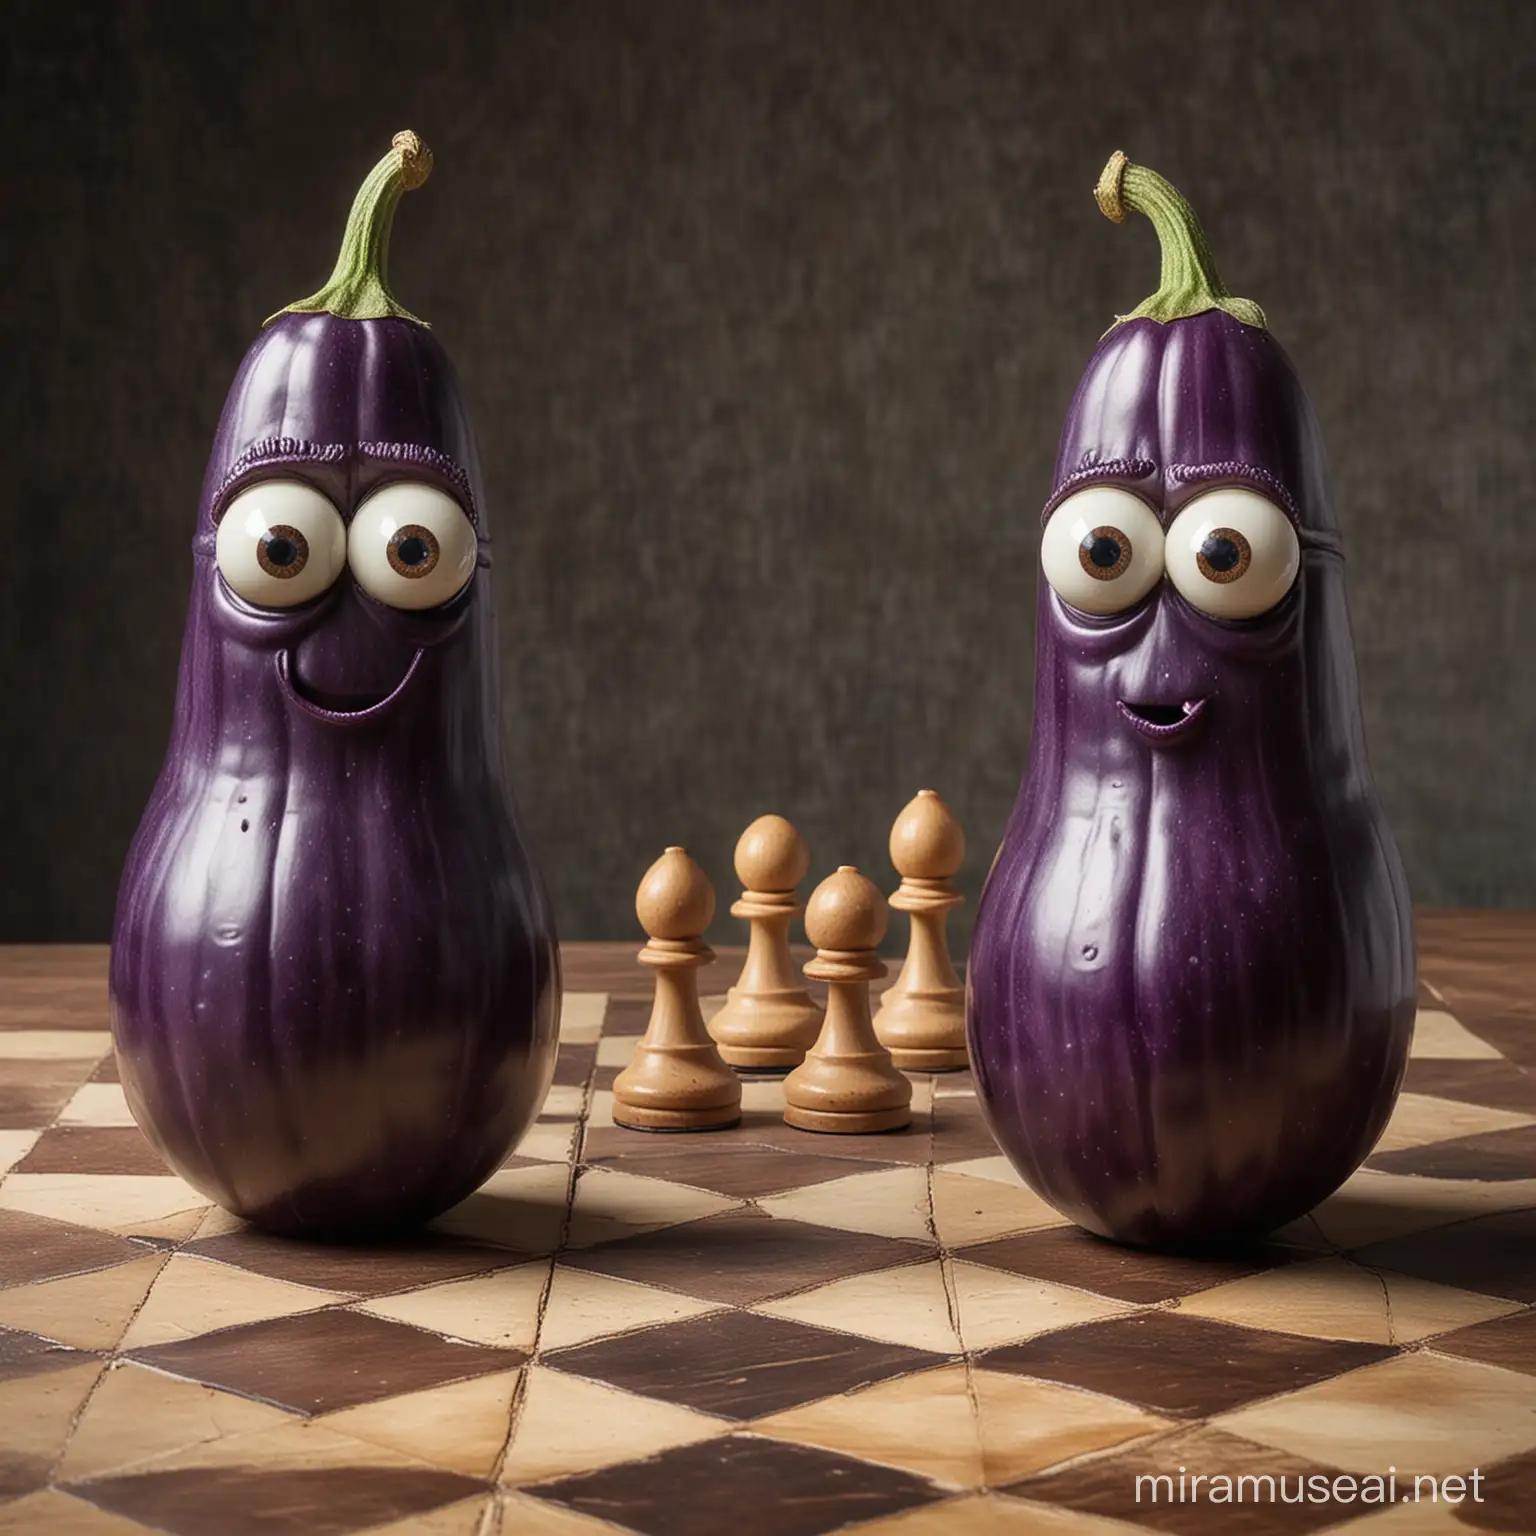 Playful Eggplants Engaged in Intense Chess Match